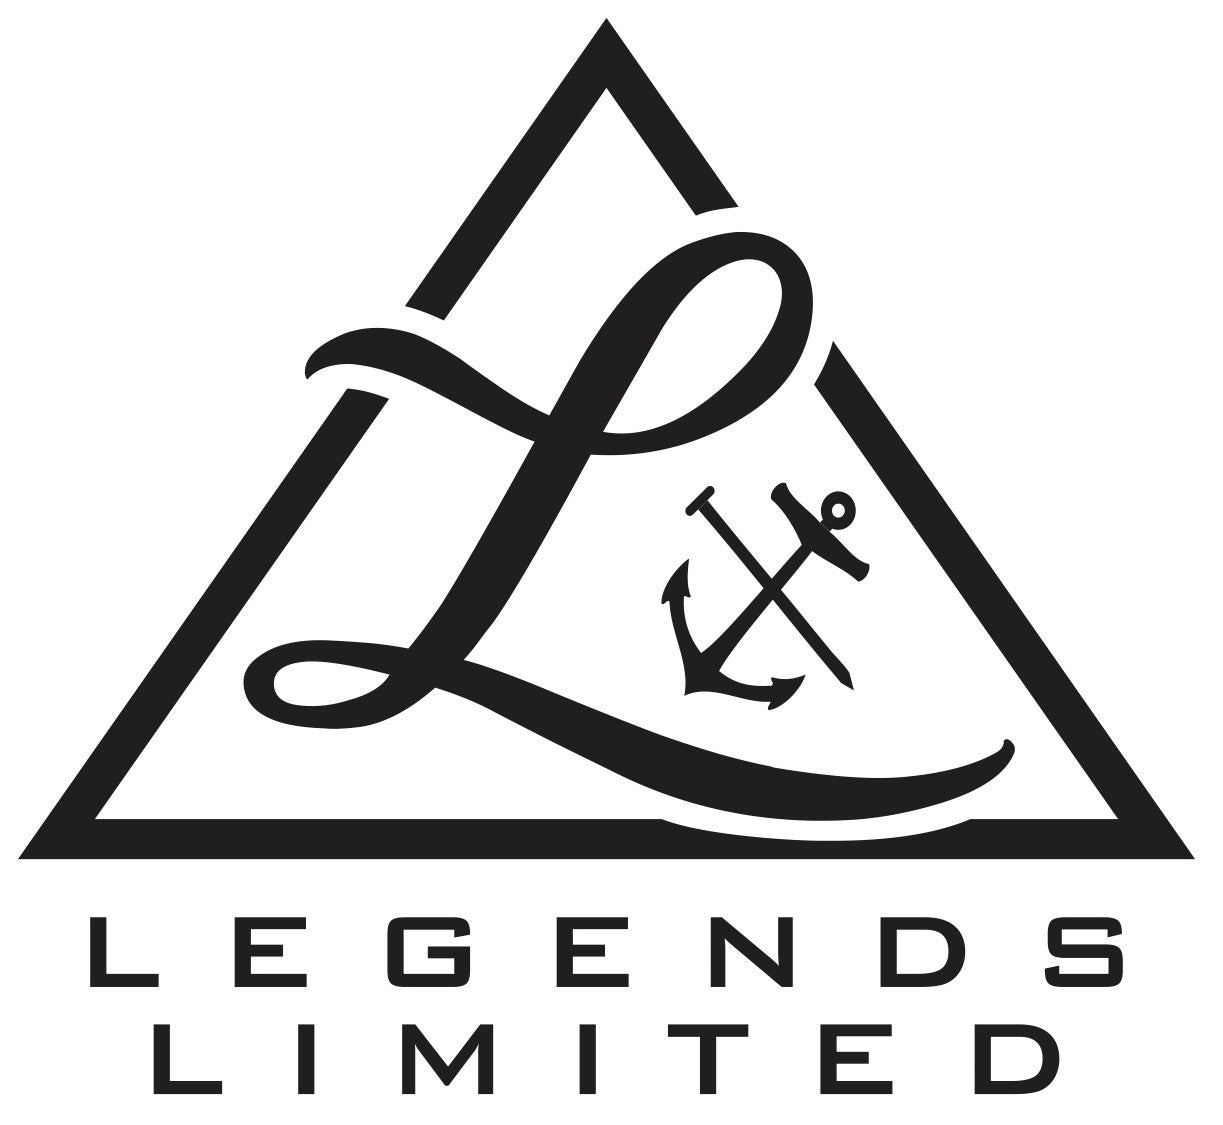 Legends Limited premium lifestyle brands "Pyramid" logo features Legends L with signature anchor and nail cross.